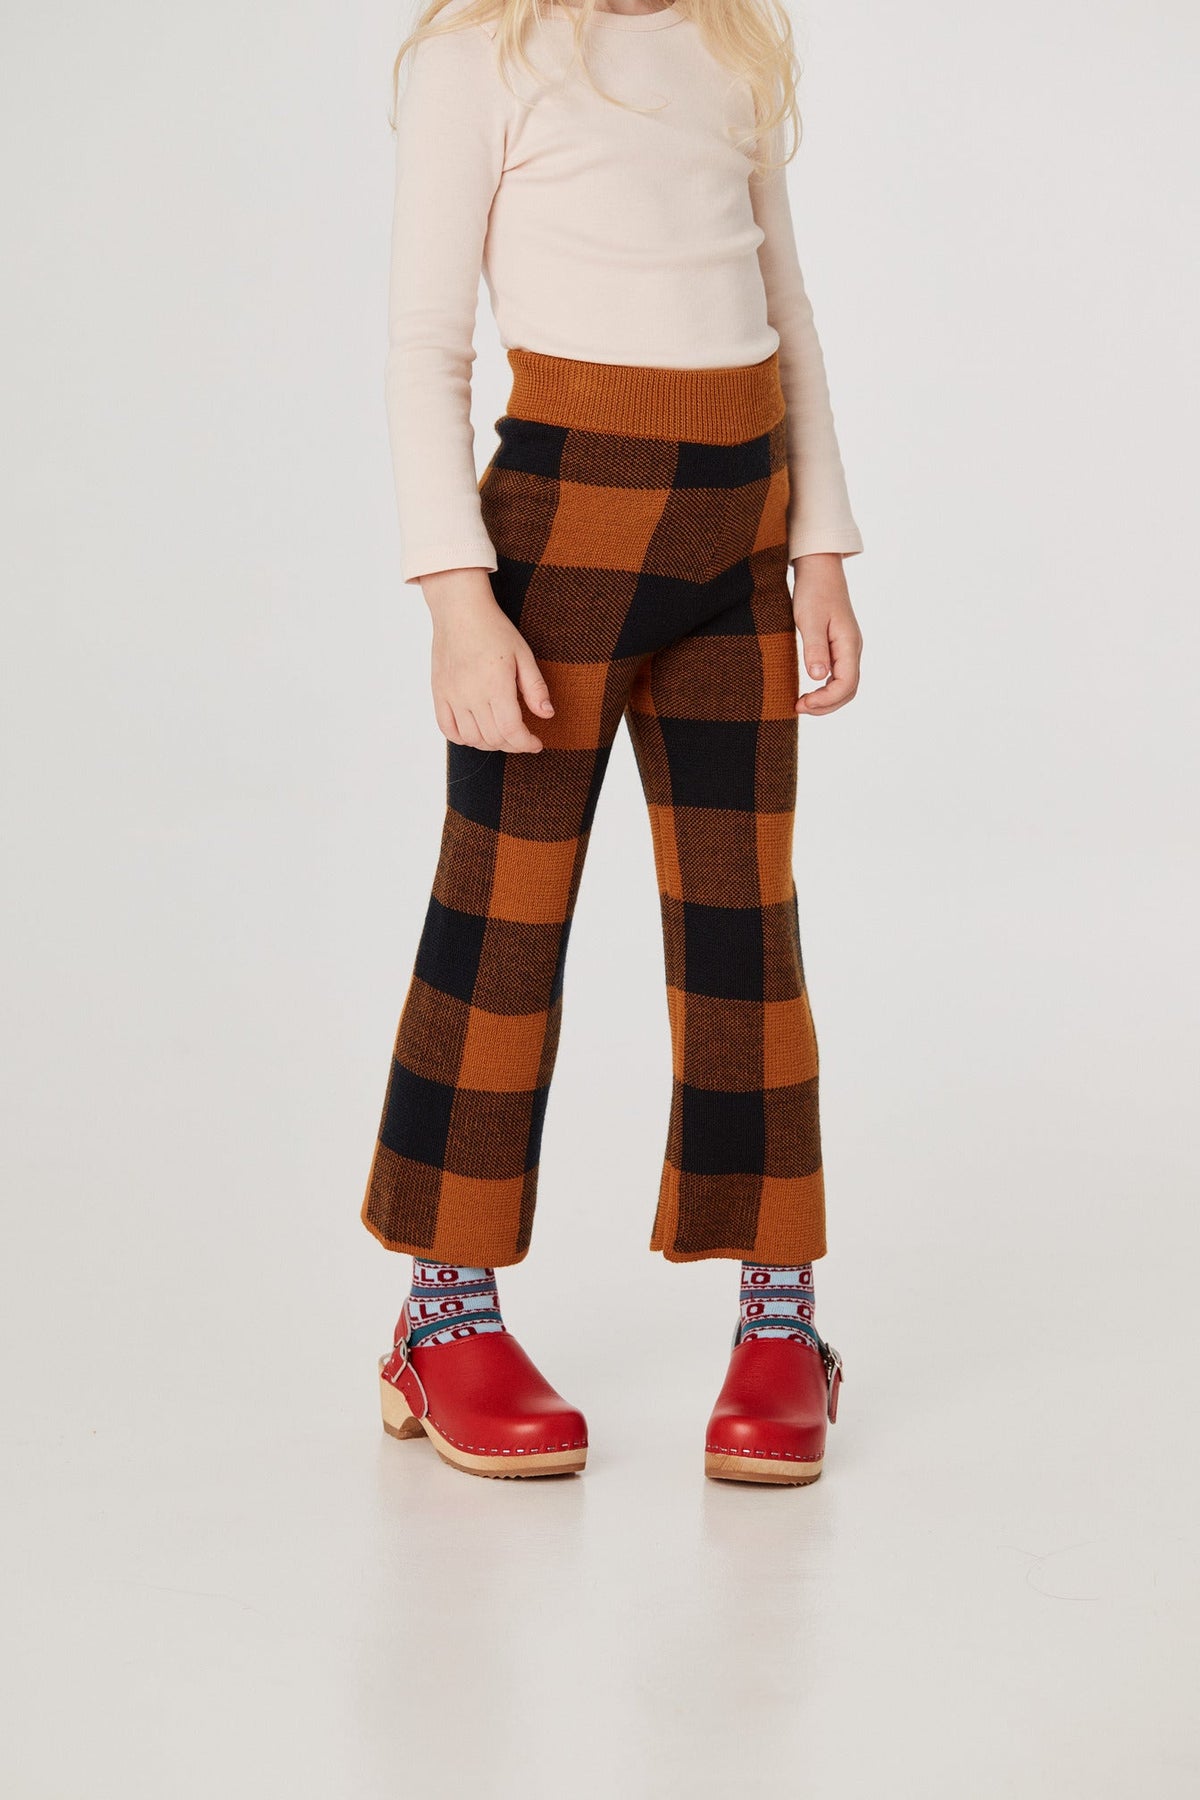 Plaid Slim Pant - Marigold+Model is 45 inches tall, 40lbs, wearing a size 4-5y